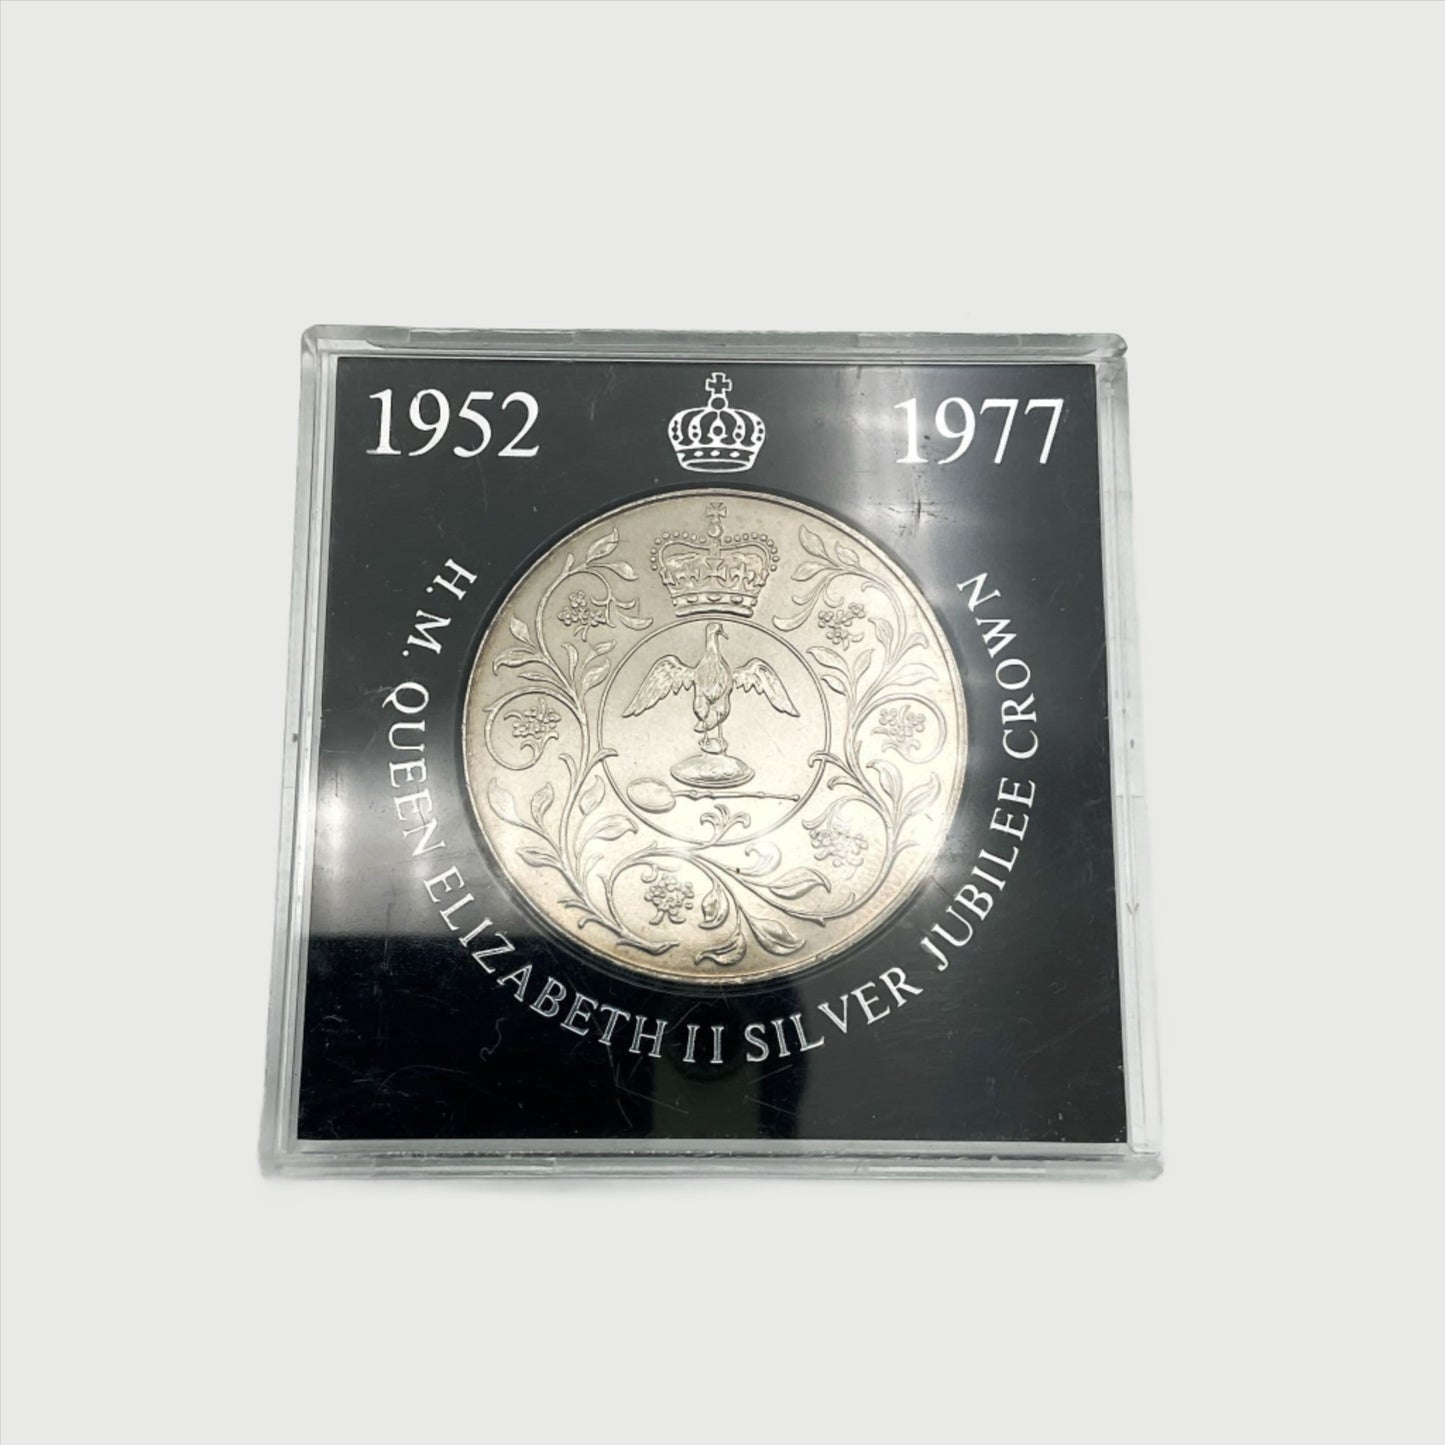 silver crown coin in a black case with HM Queen Elizabeth II Jubliee Crown